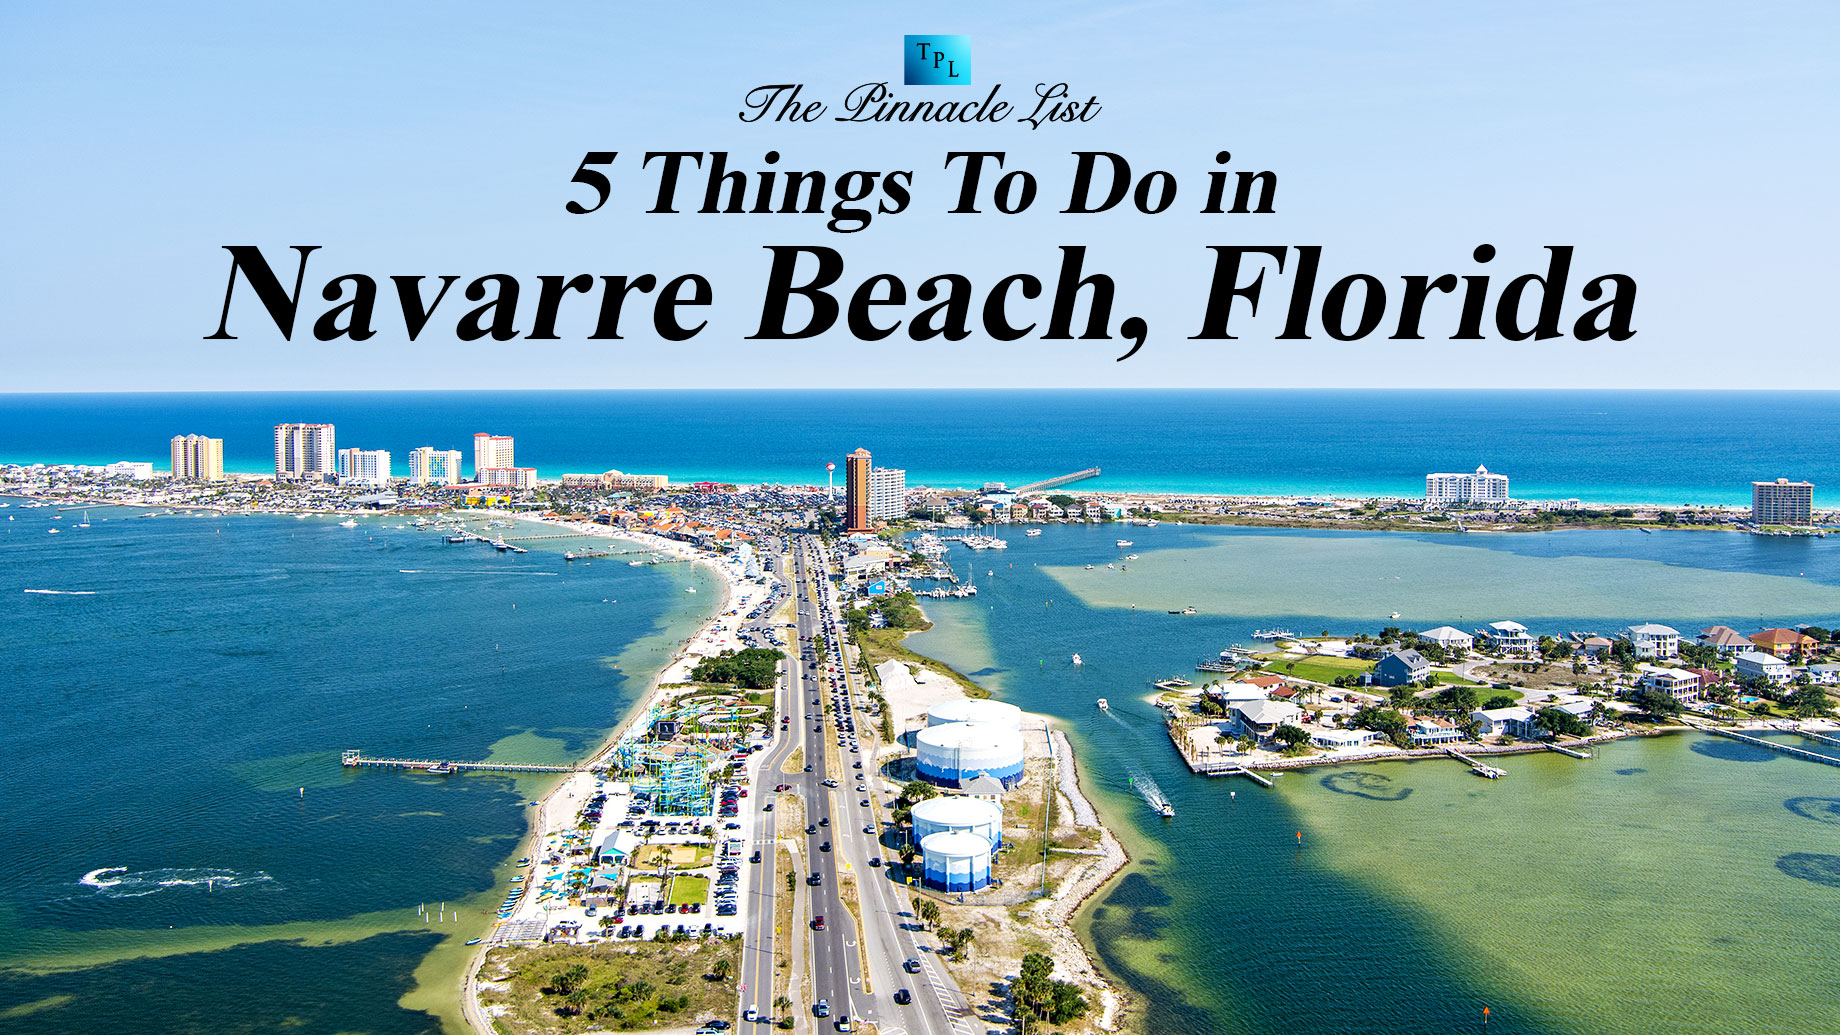 5 Things To Do in Navarre Beach, Florida